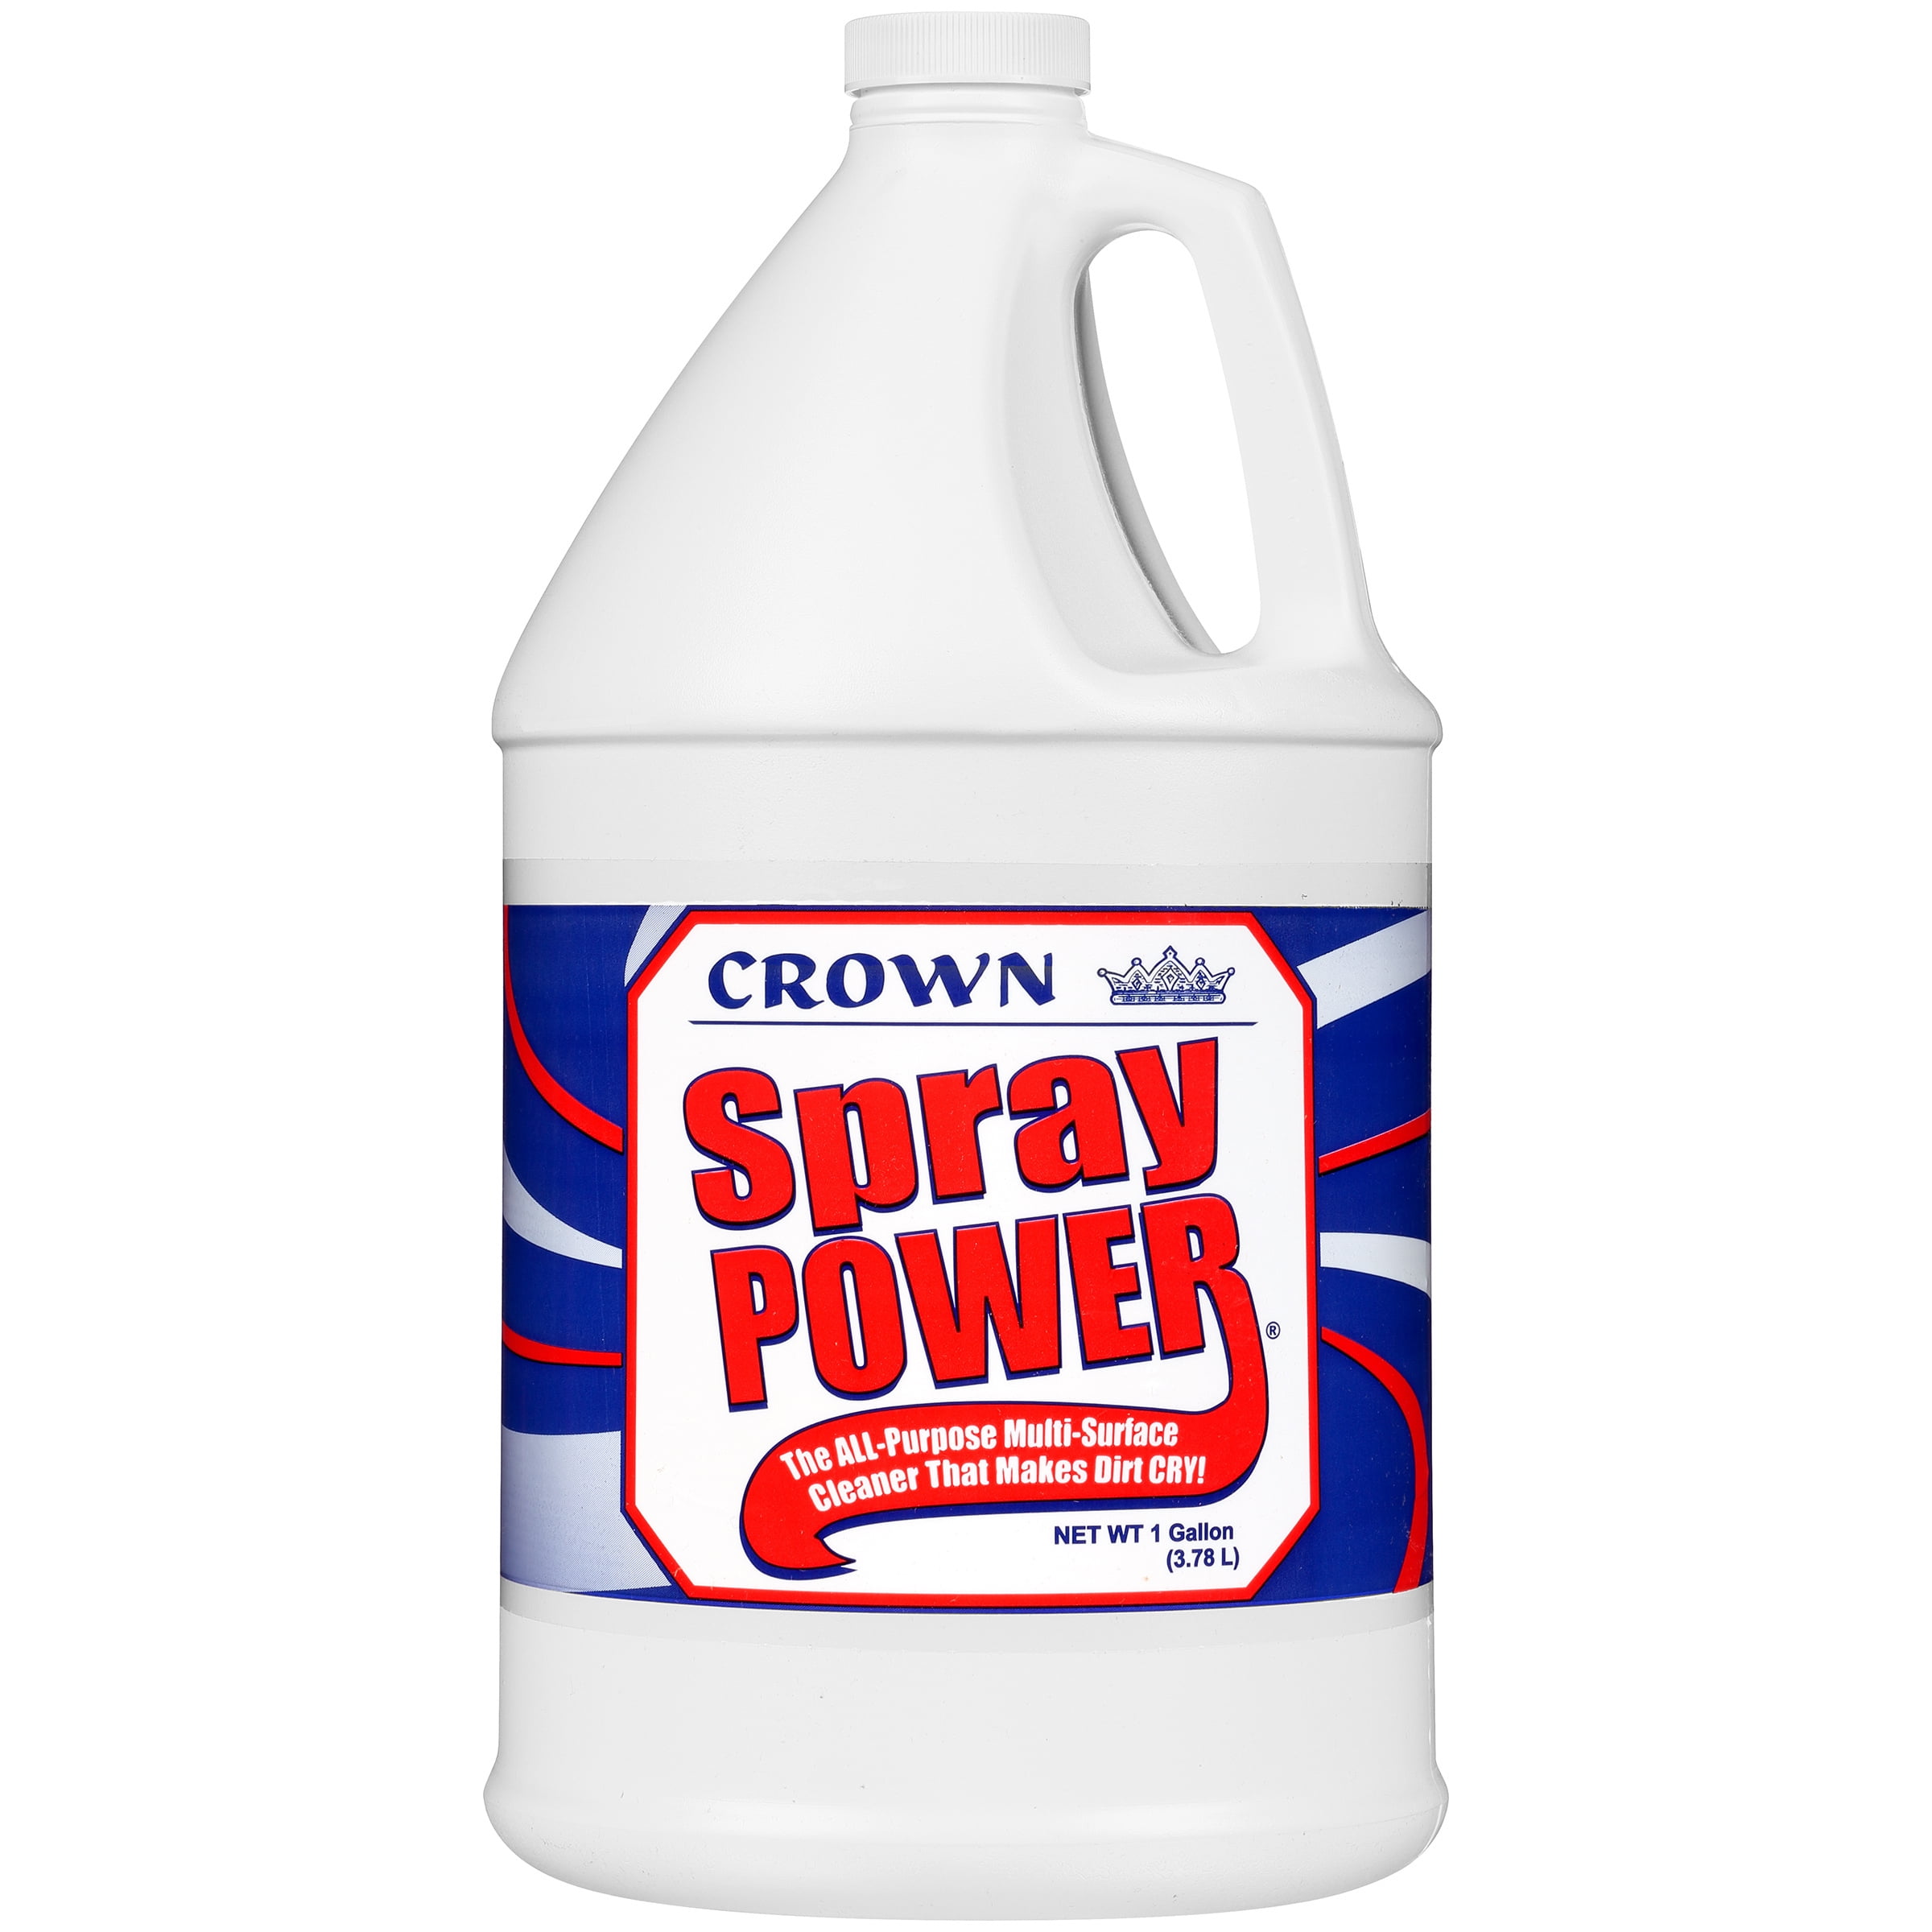 Crown Spray Power All-Purpose Multi-Surface Cleaner, 1 gallon